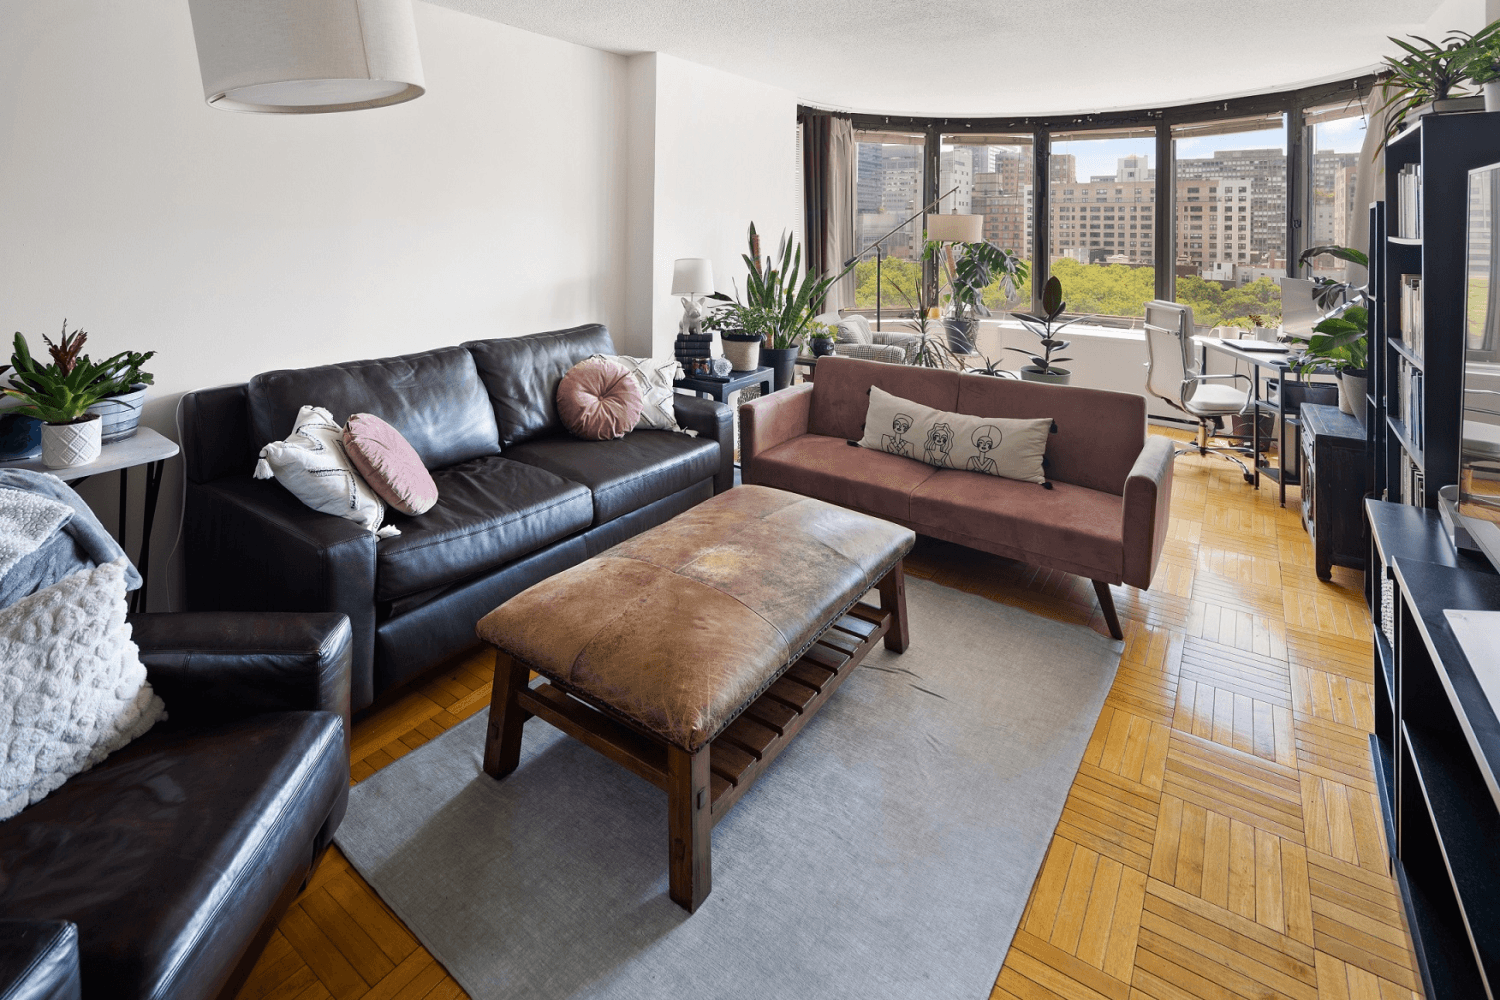 Spacious South facing One Bedroom Apartment with Empire State Building views in a Full Service East Side Condominium with the lowest carrying costs in Manhattan.